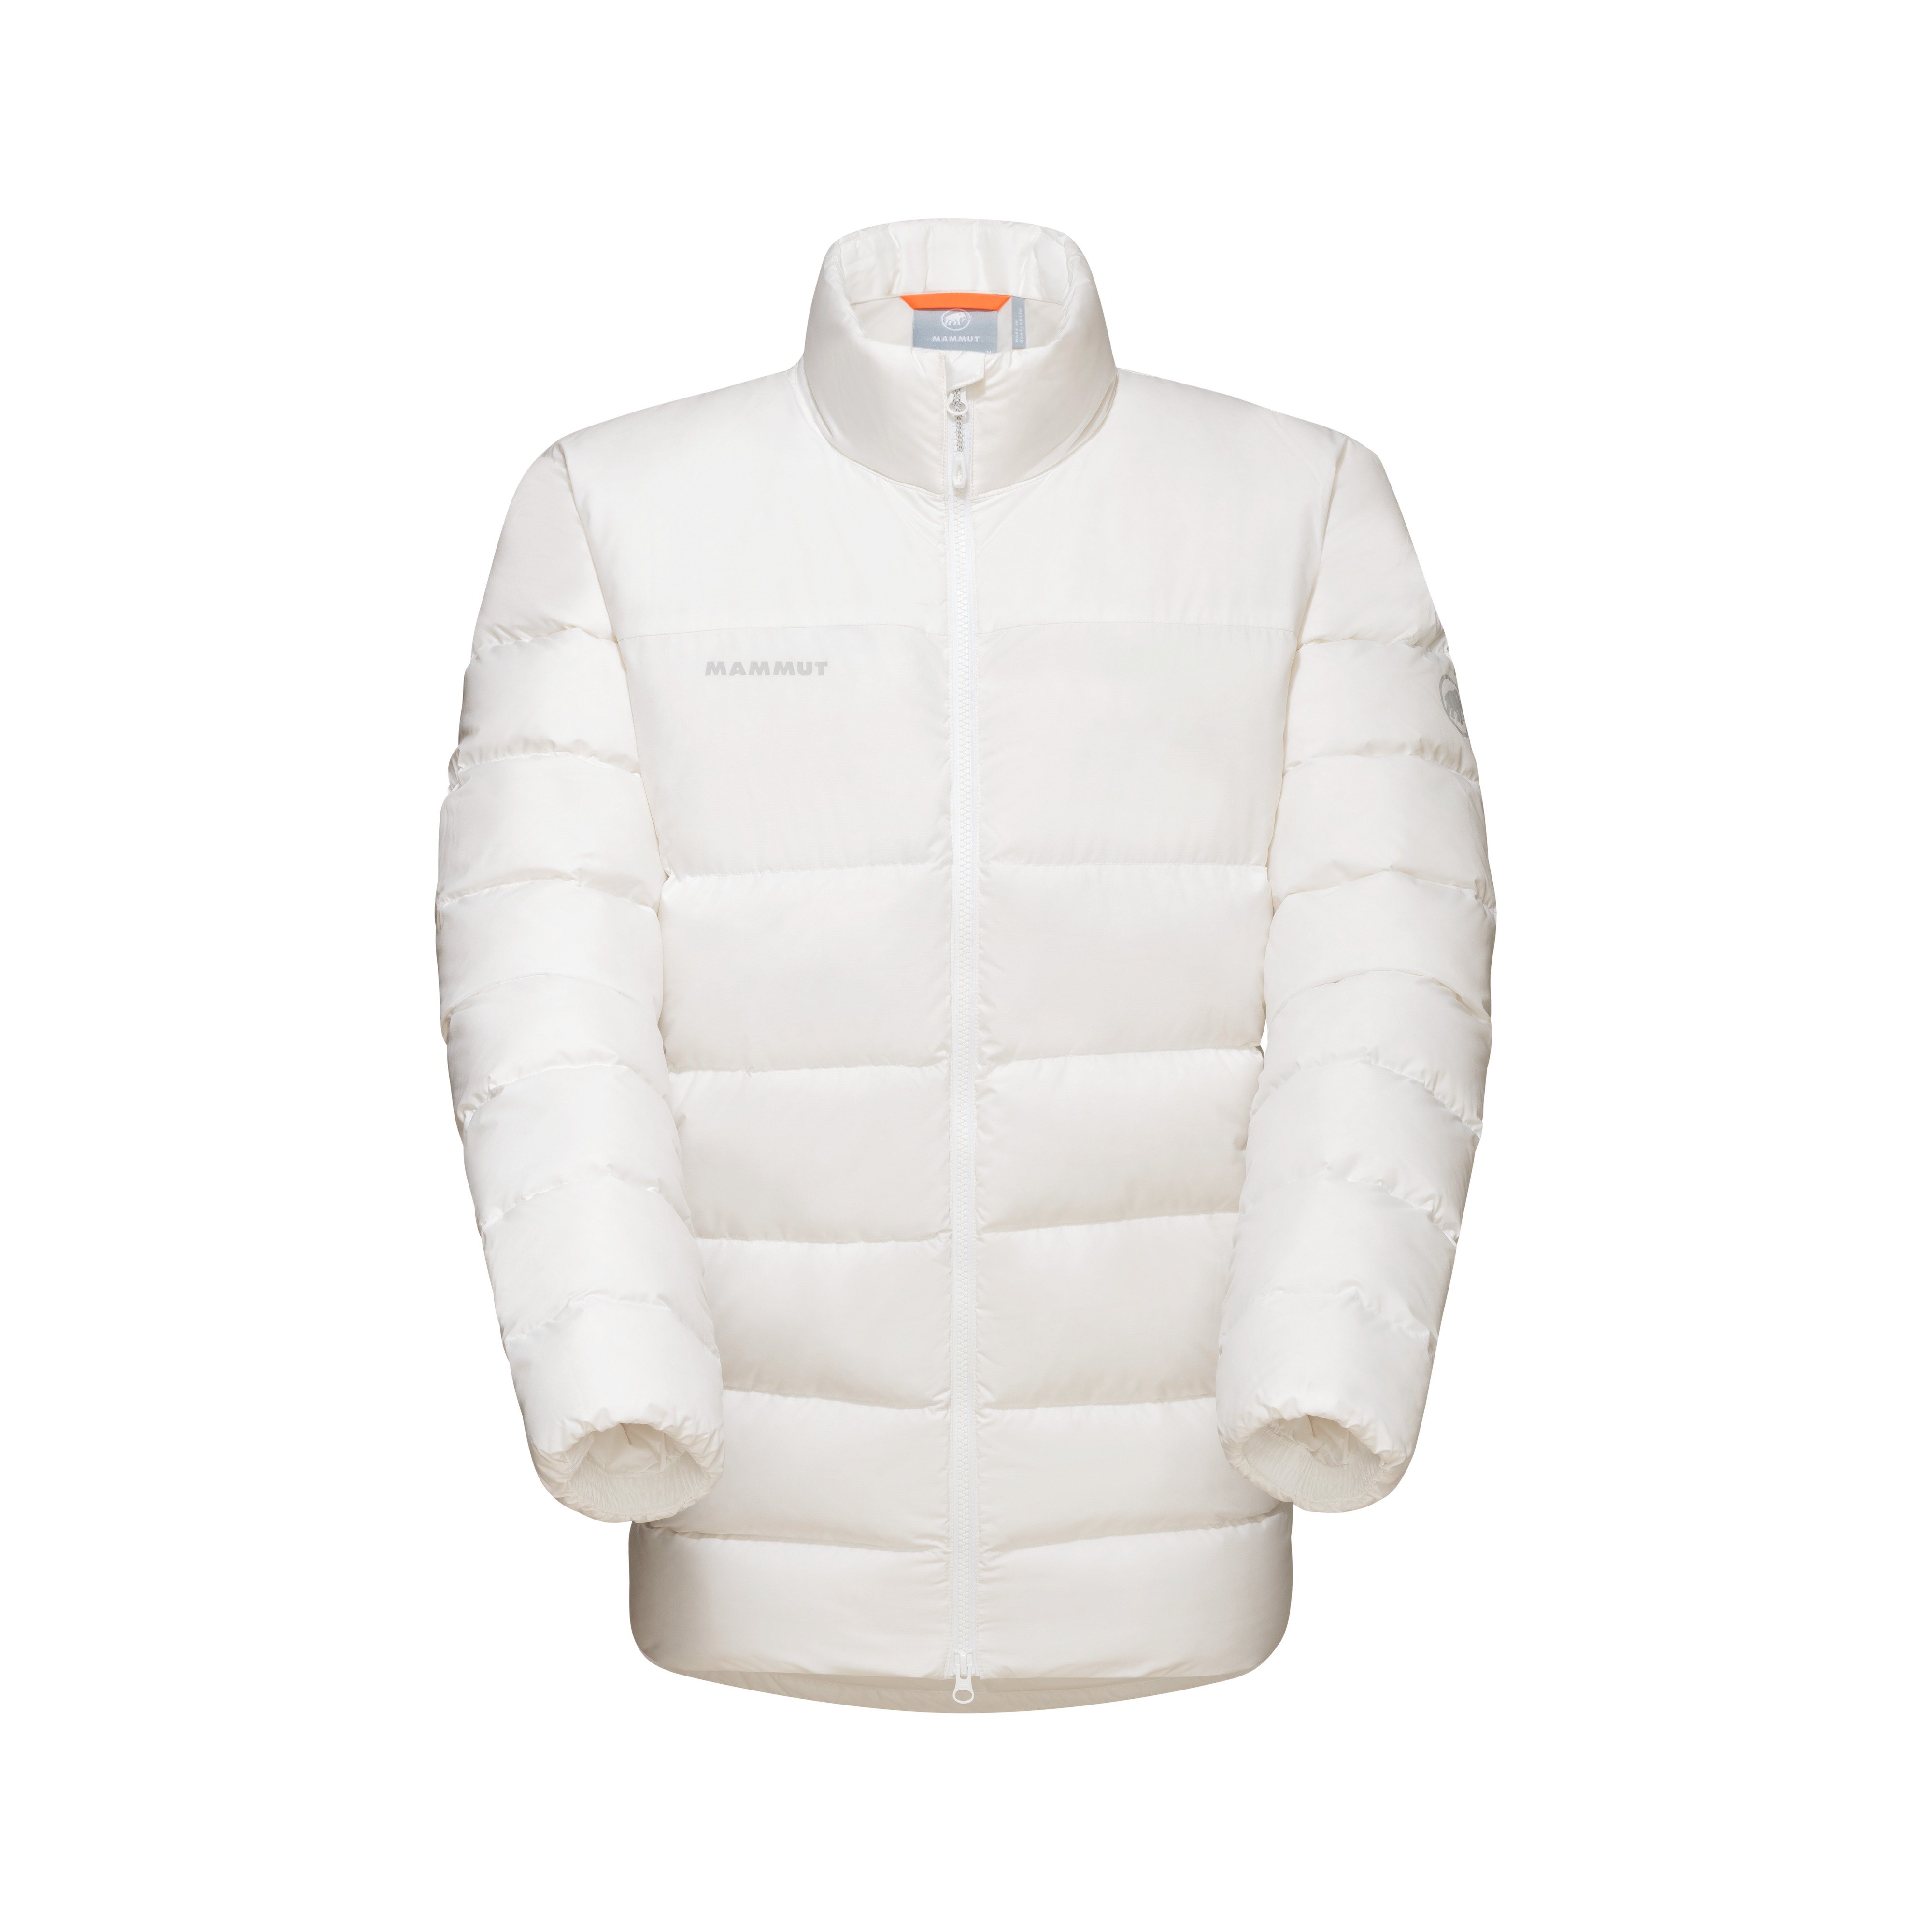 Whitehorn IN Jacket Men - white, L product image